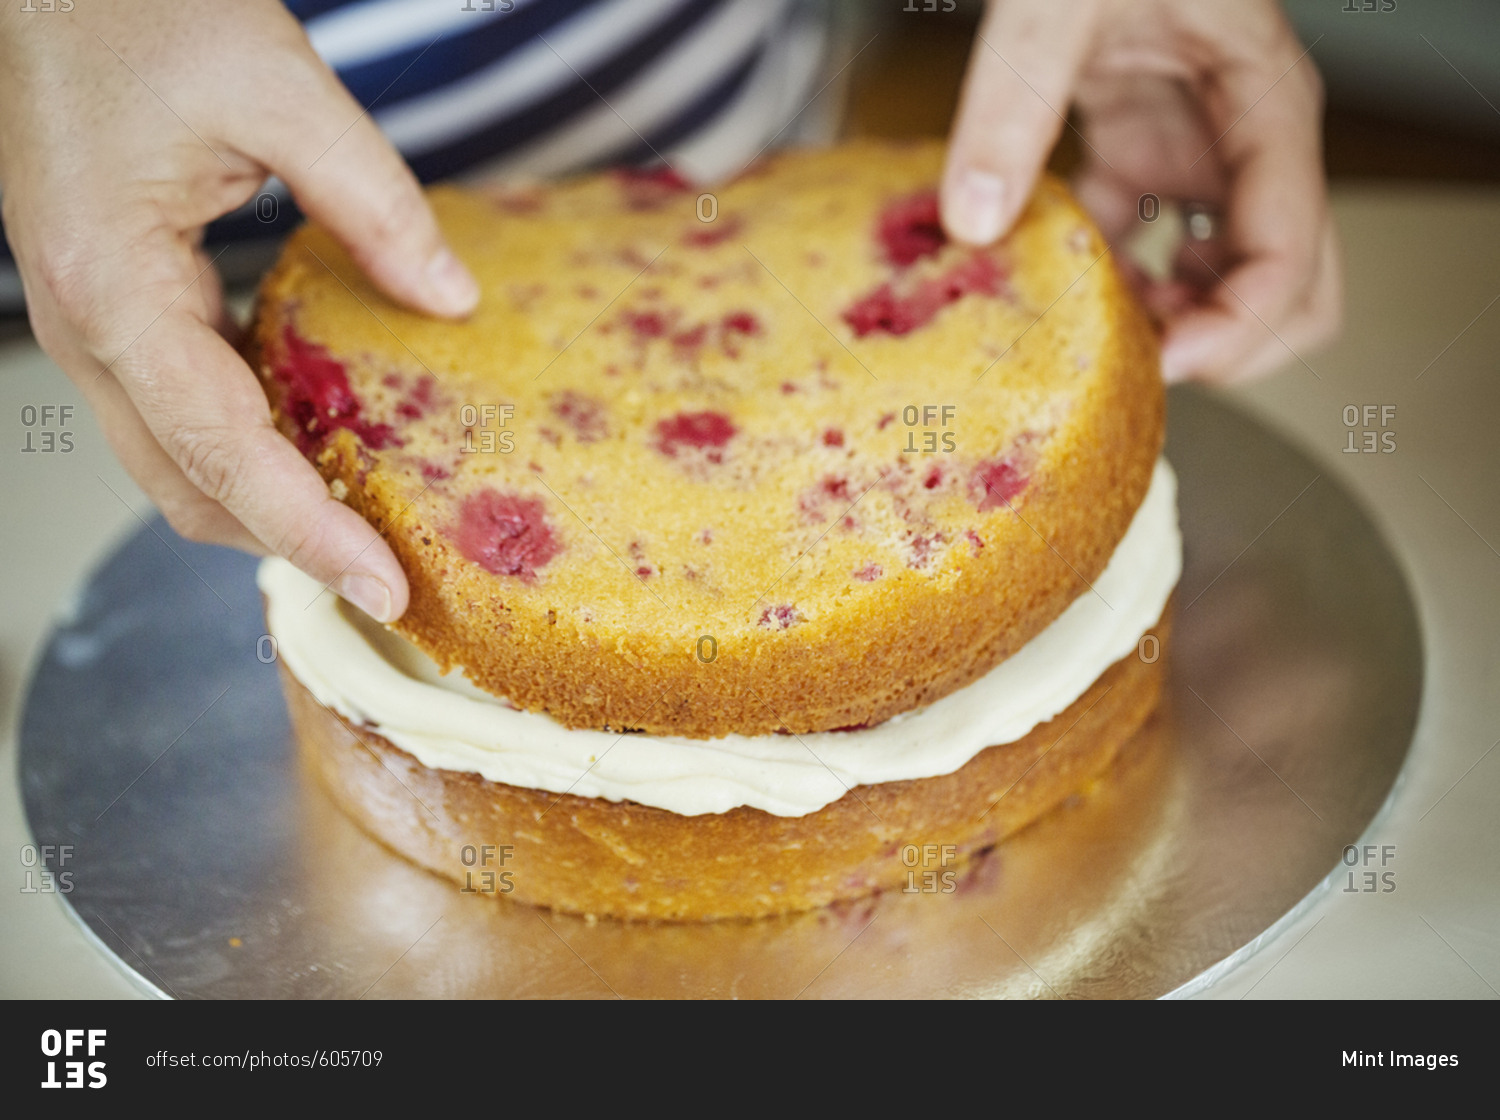 Close up high angle view of person assembling a layer cake, placing top on layer of cream.